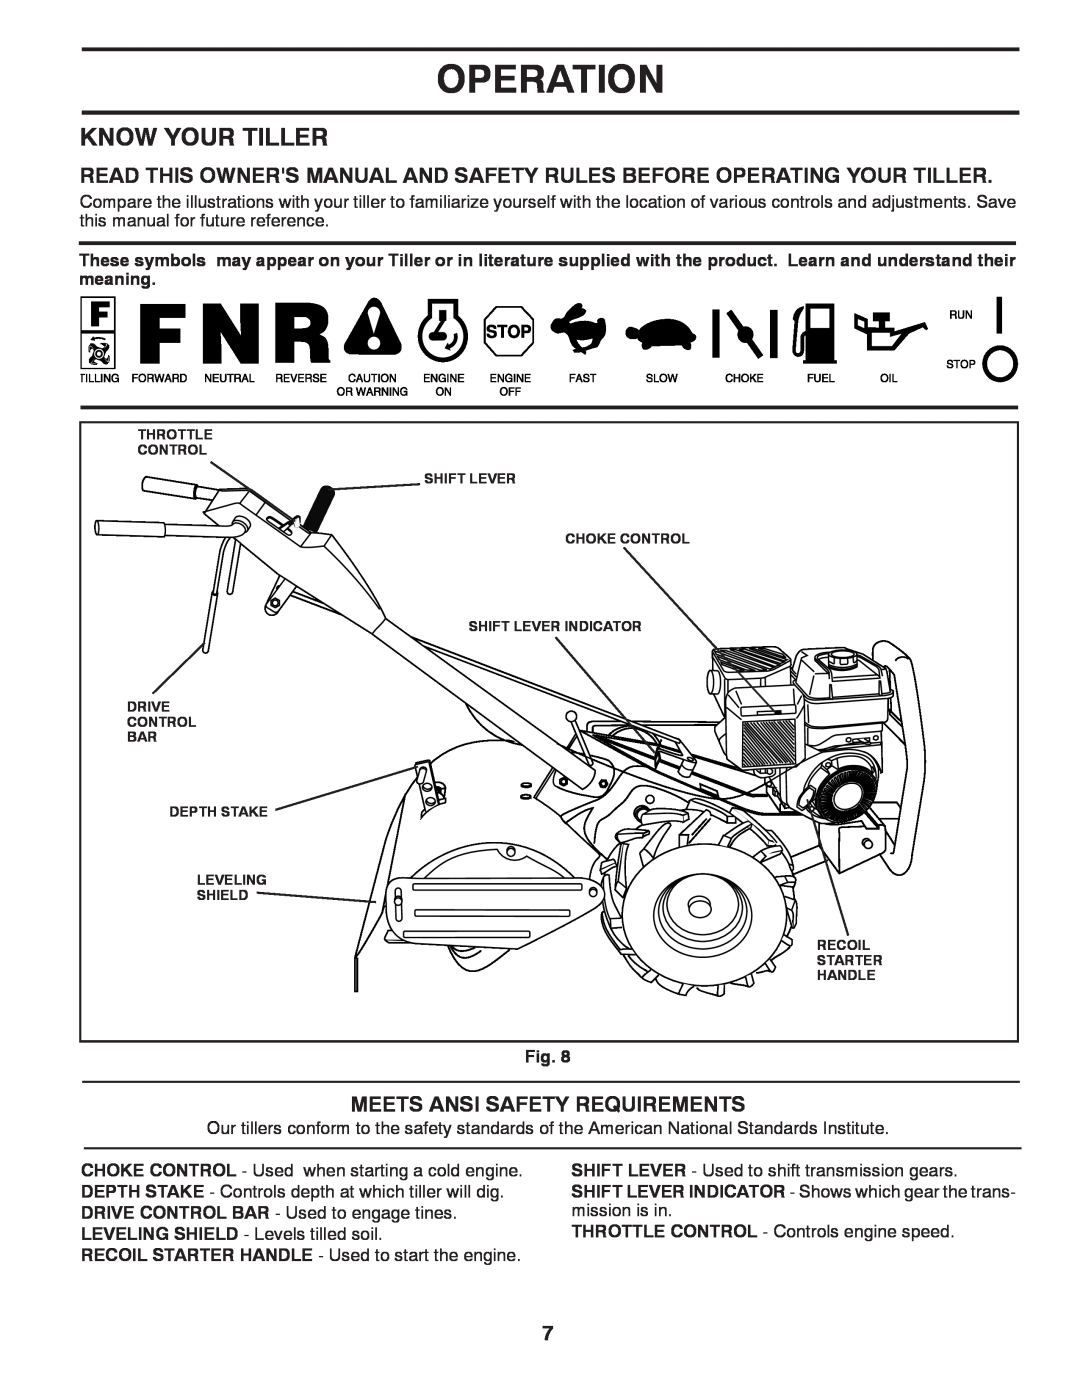 Poulan 96092002200, 433107 manual Operation, Know Your Tiller, Meets Ansi Safety Requirements 